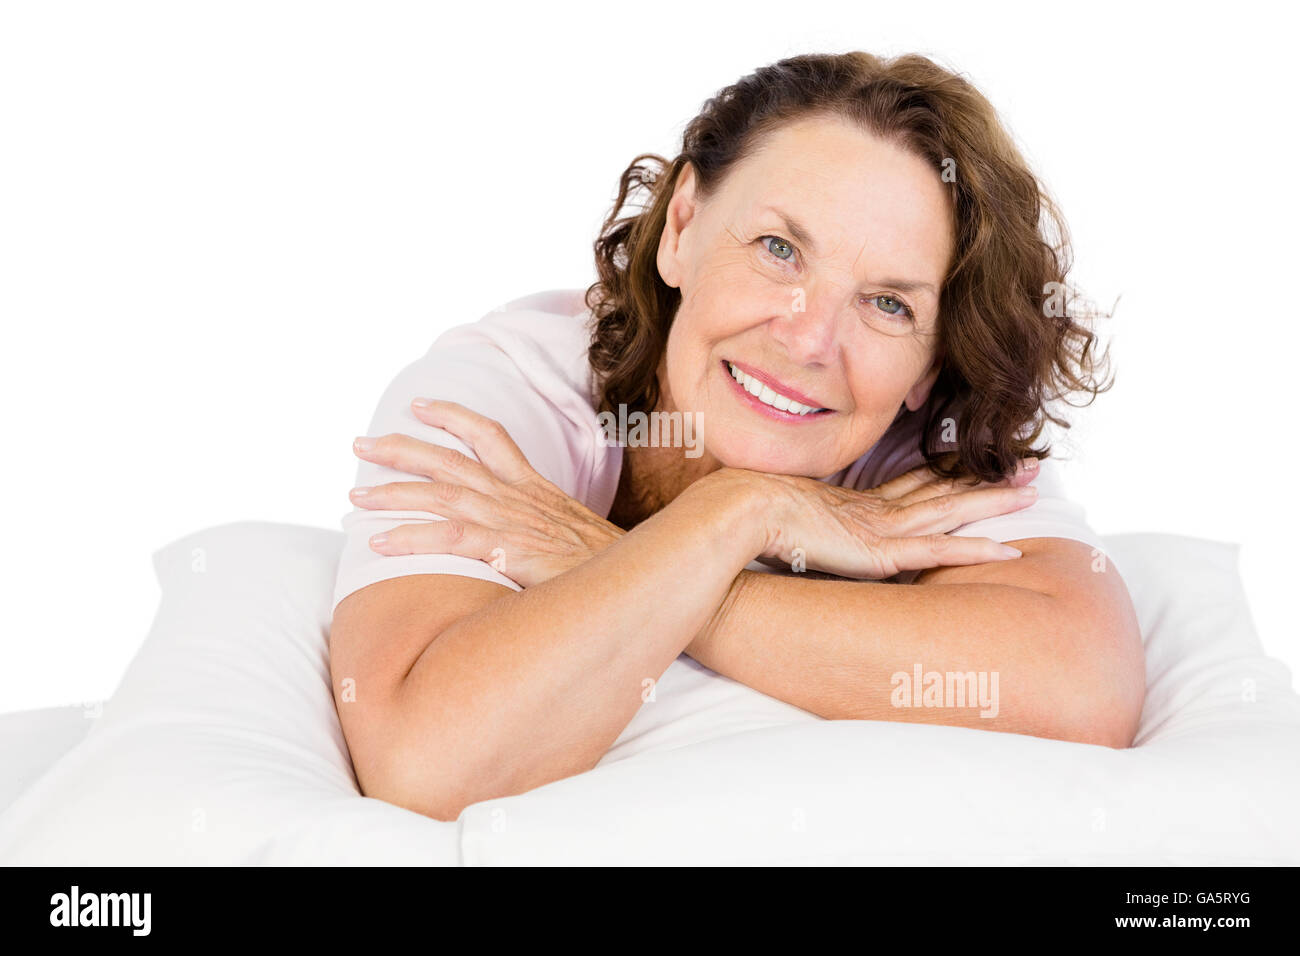 Young woman lying on bed Banque D'Images